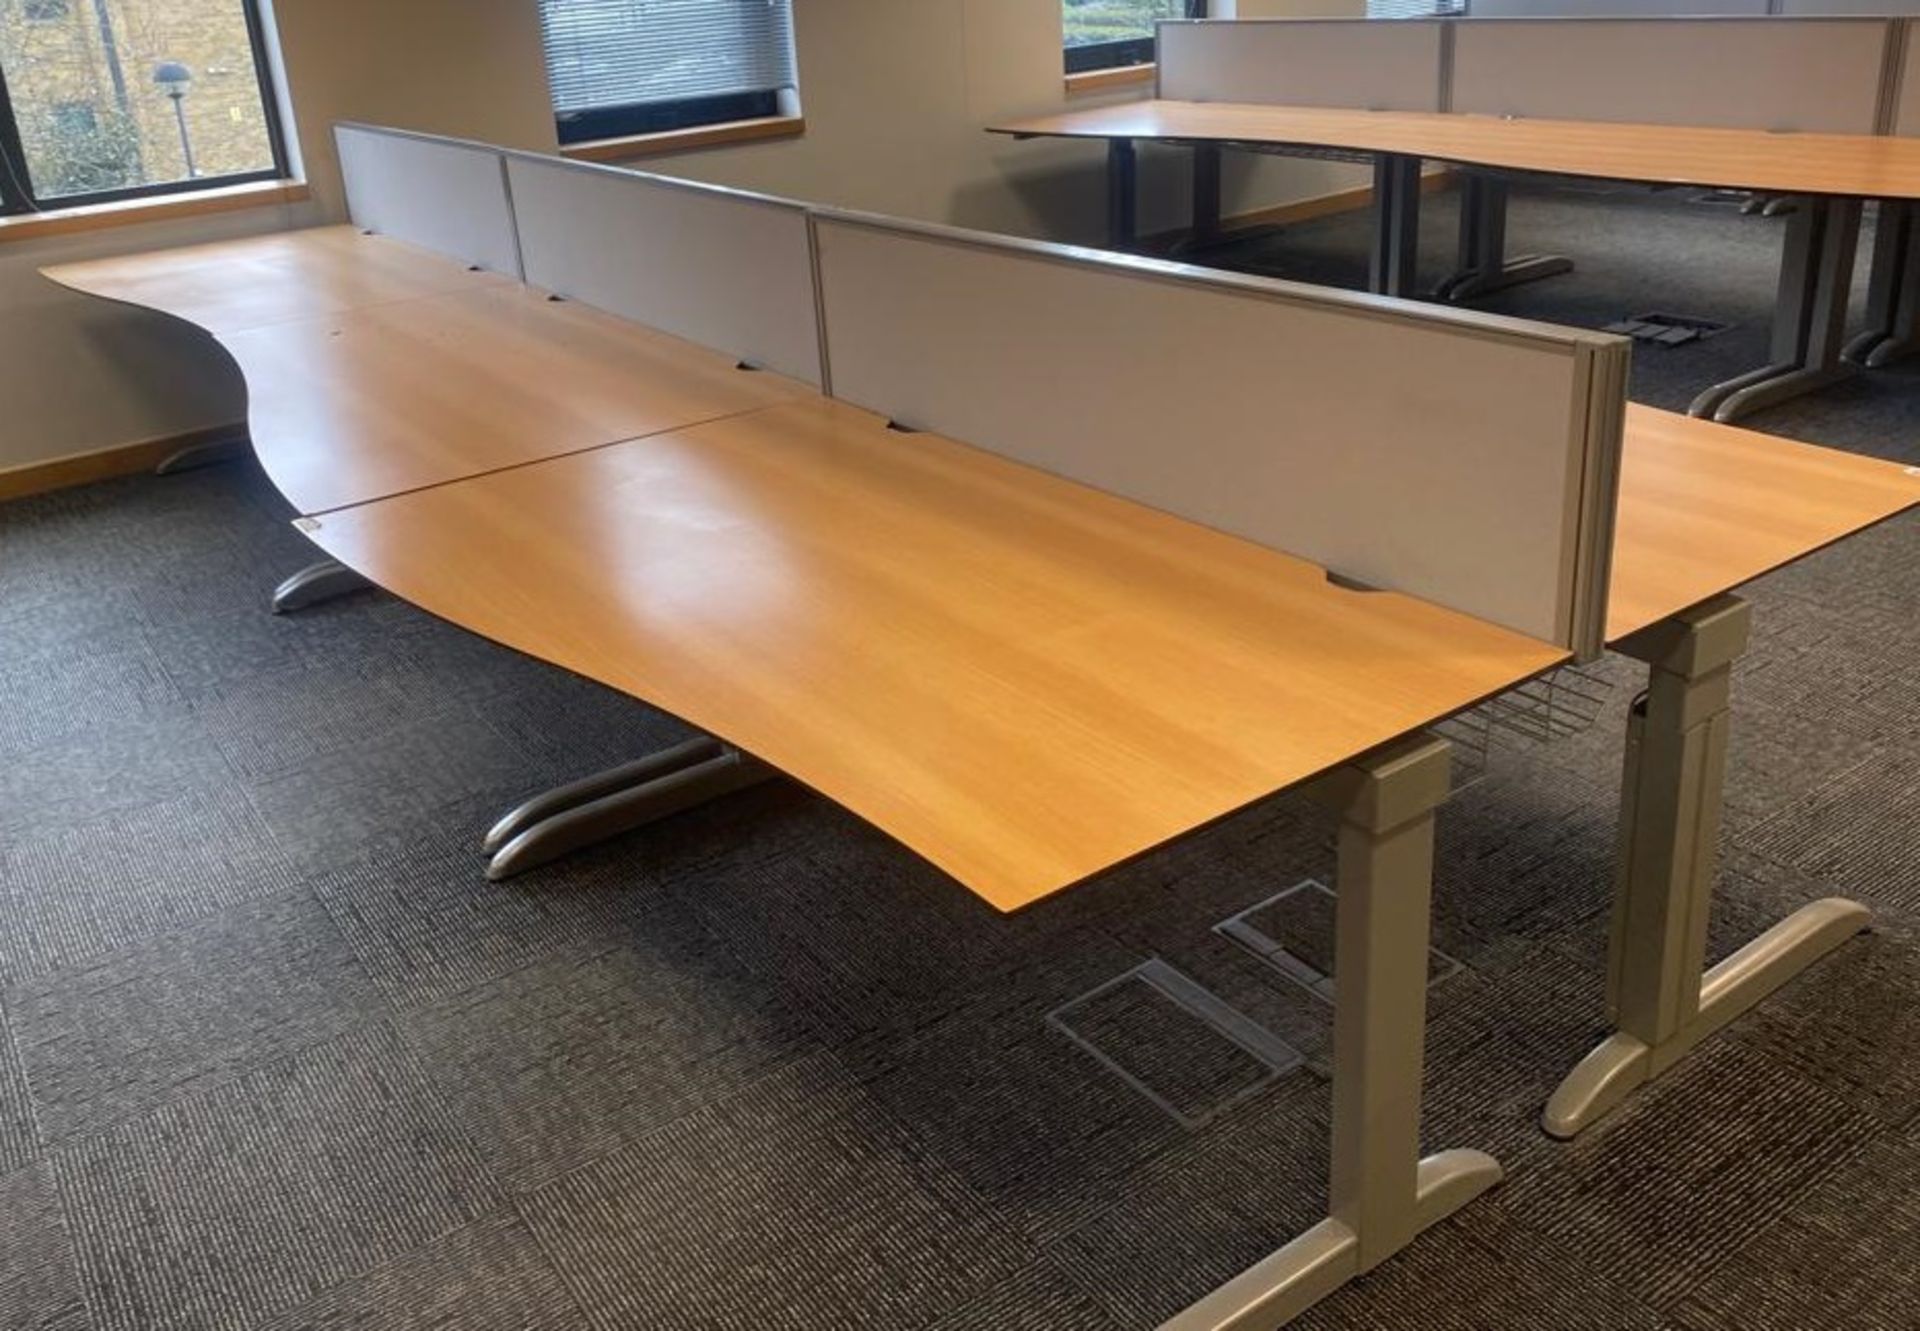 4 x Techo Wave Office Desks With Privacy Panels and Cable Tidy Cages - Beech Wood Finish